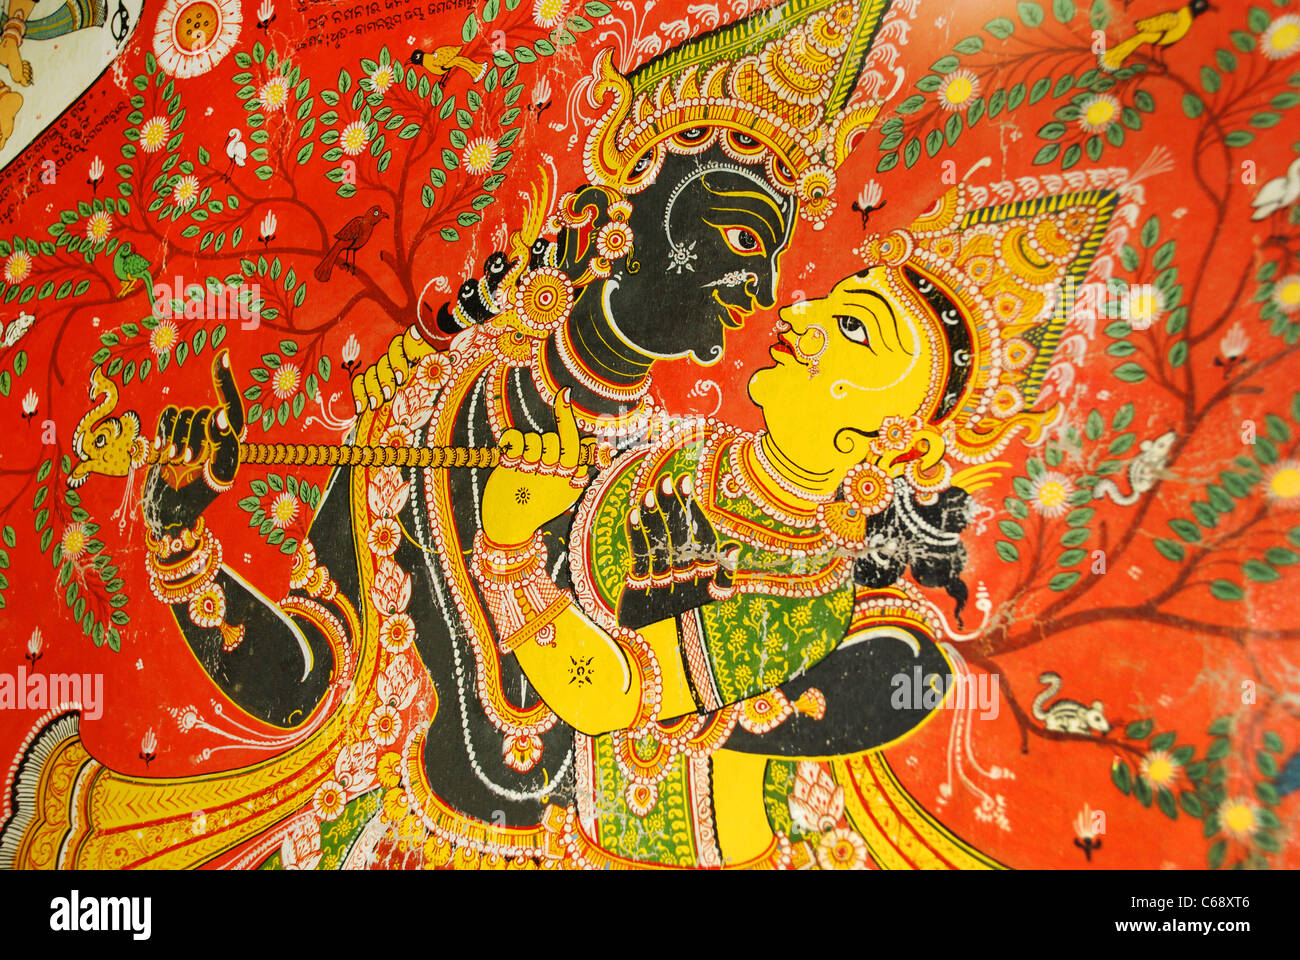 A Patichitra style of painting of Lord Krishna and Radha. Stock Photo